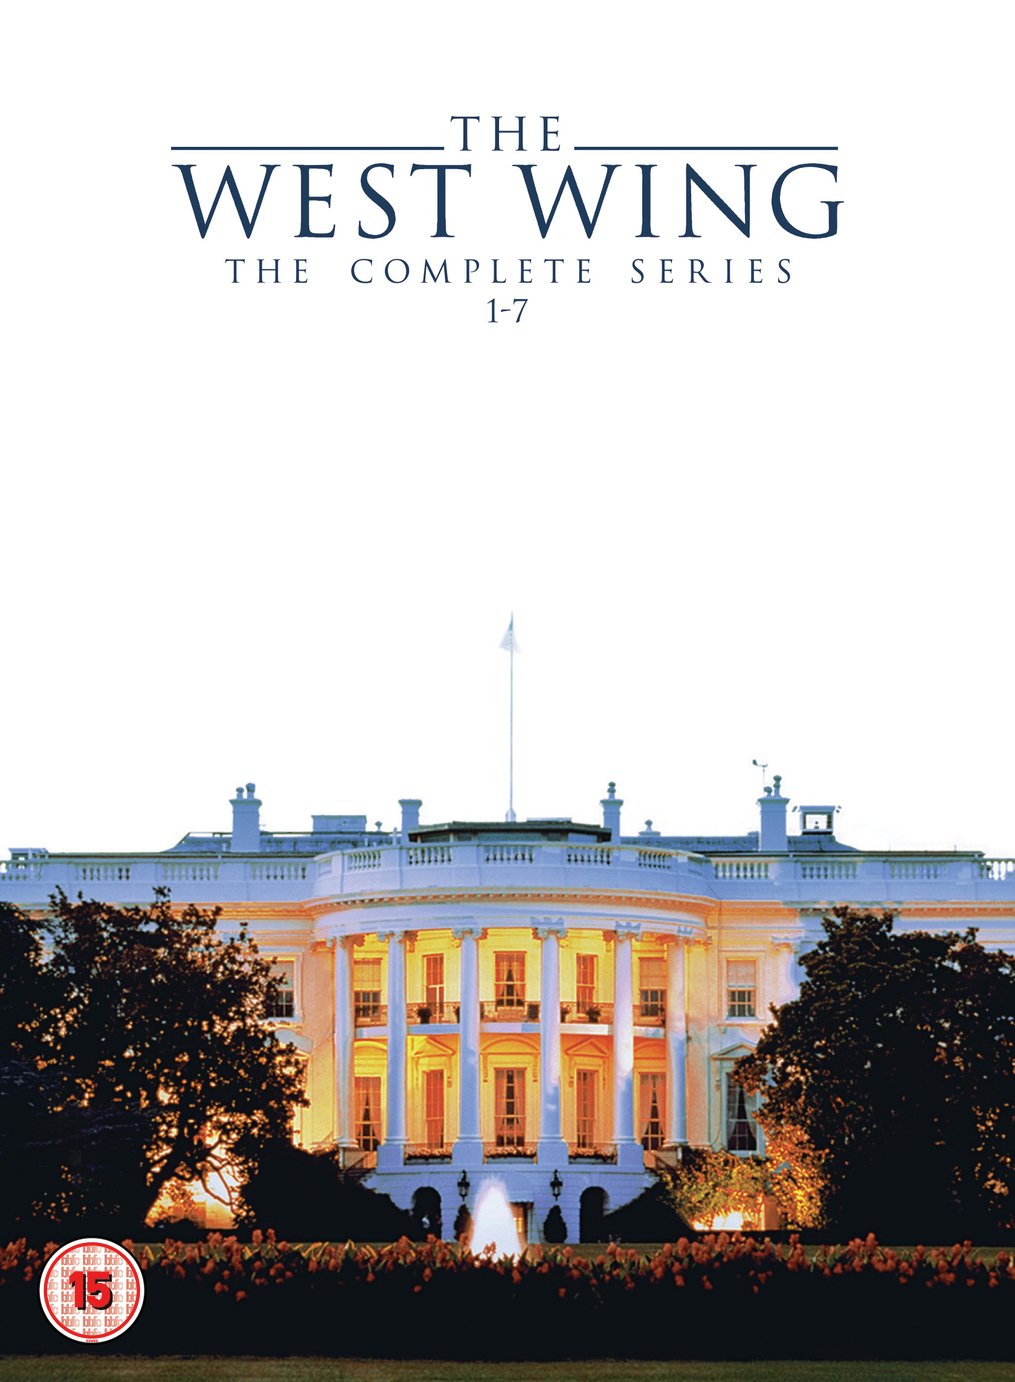 The West Wing: The Complete Series 1-7 DVD Box Set Review